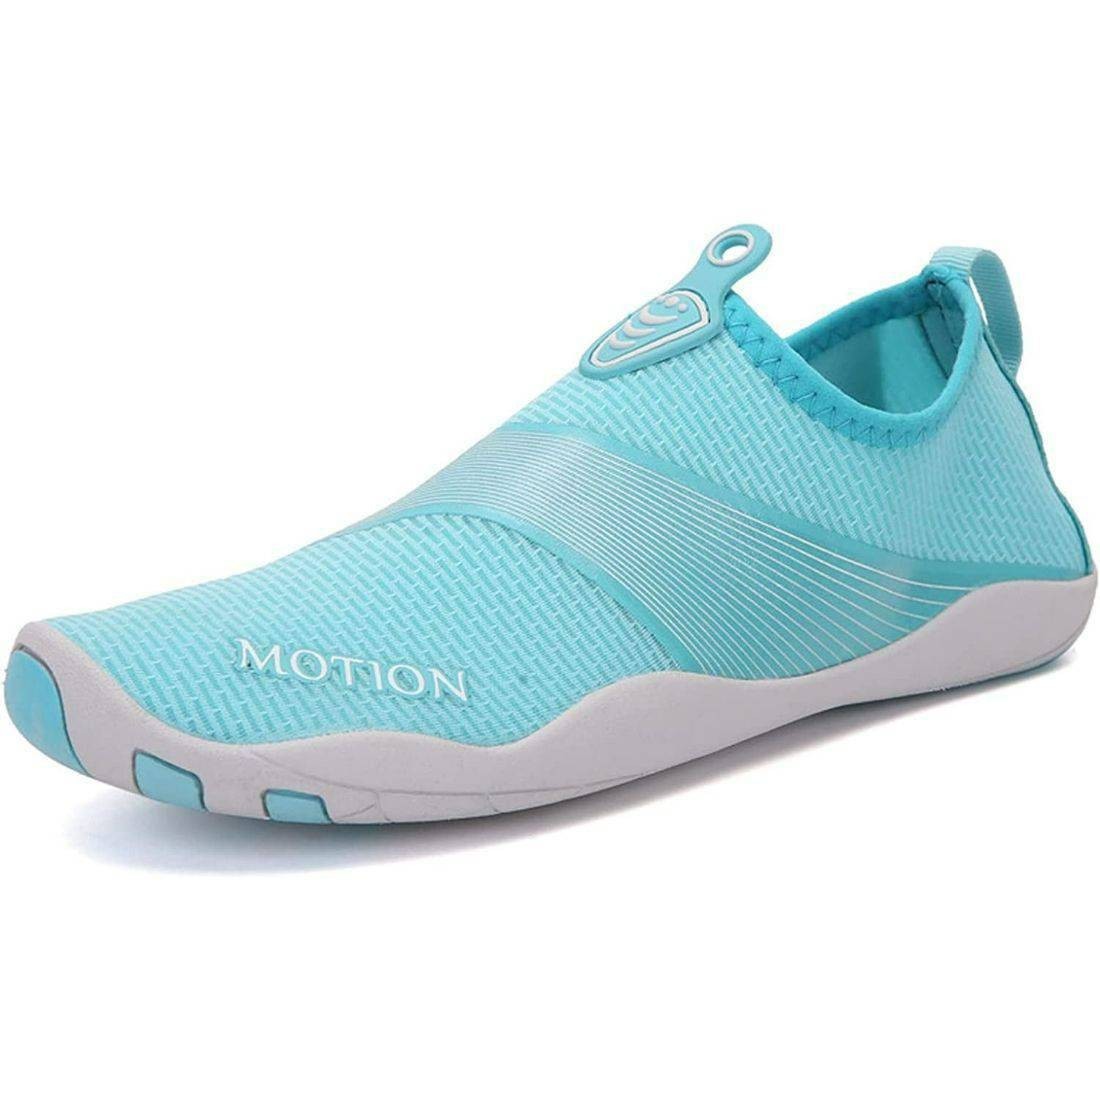 Order Aqua Teal Beach Shoes - Aqua, delivered to your home | TheOutfit